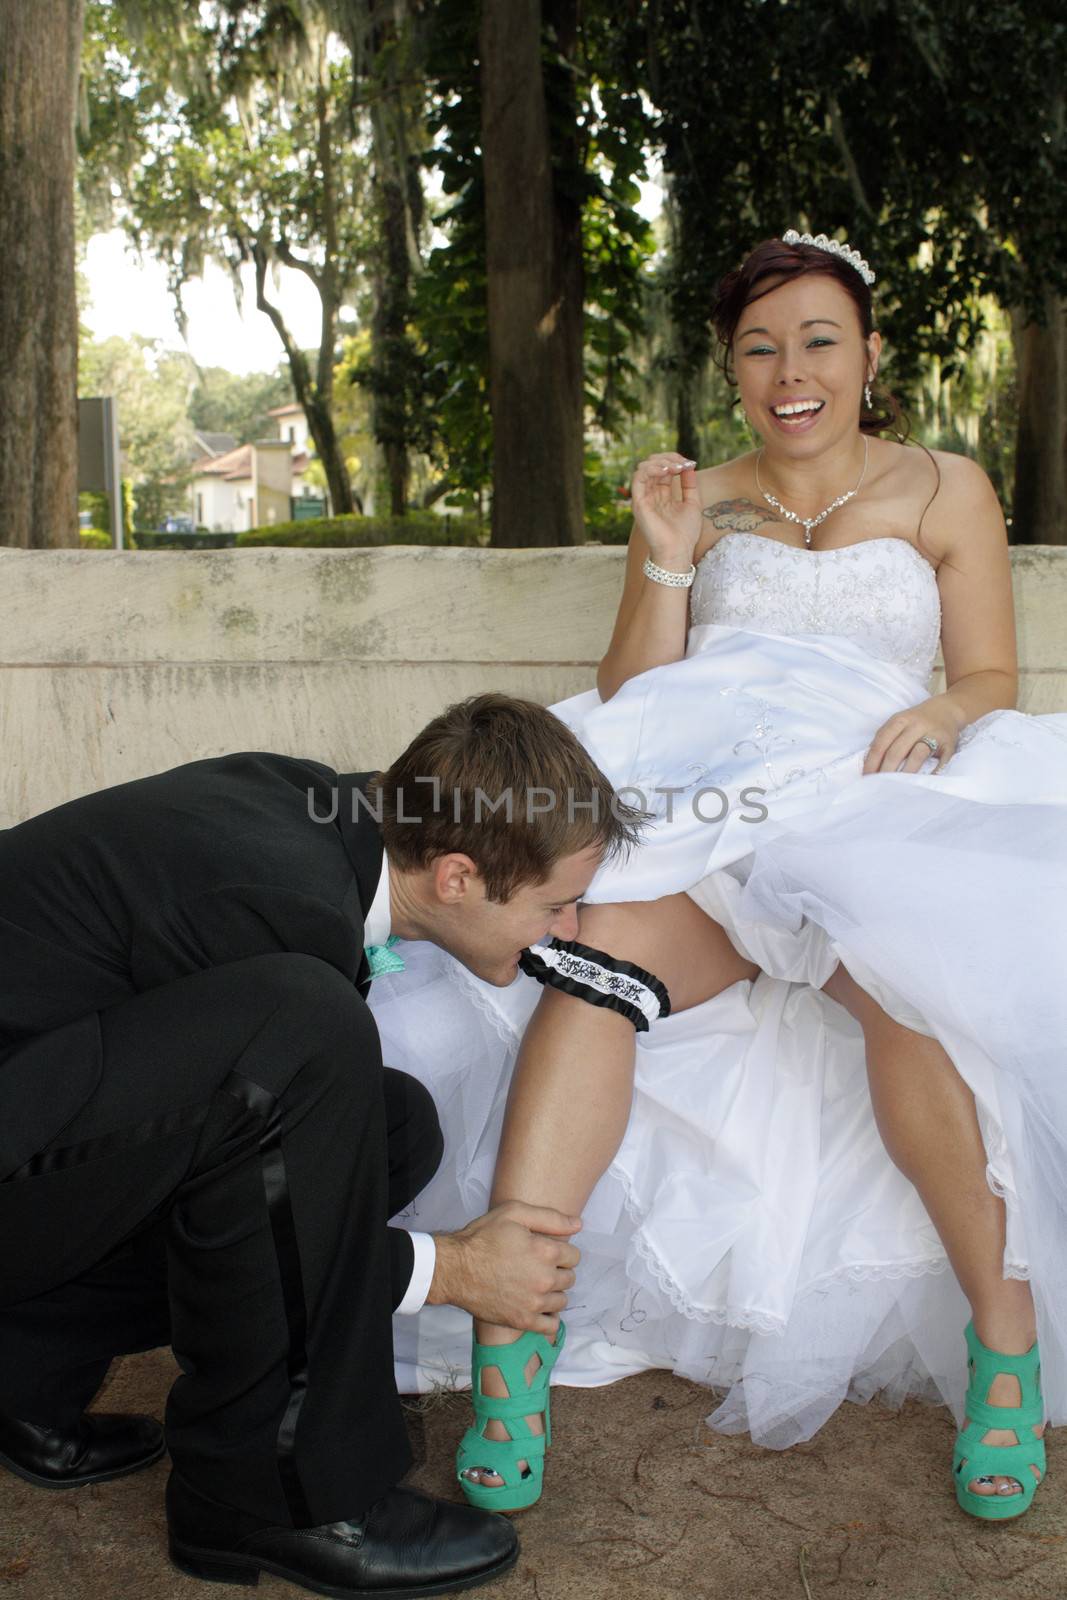 A handsome groom removes the garter from his bride's leg with his teeth.